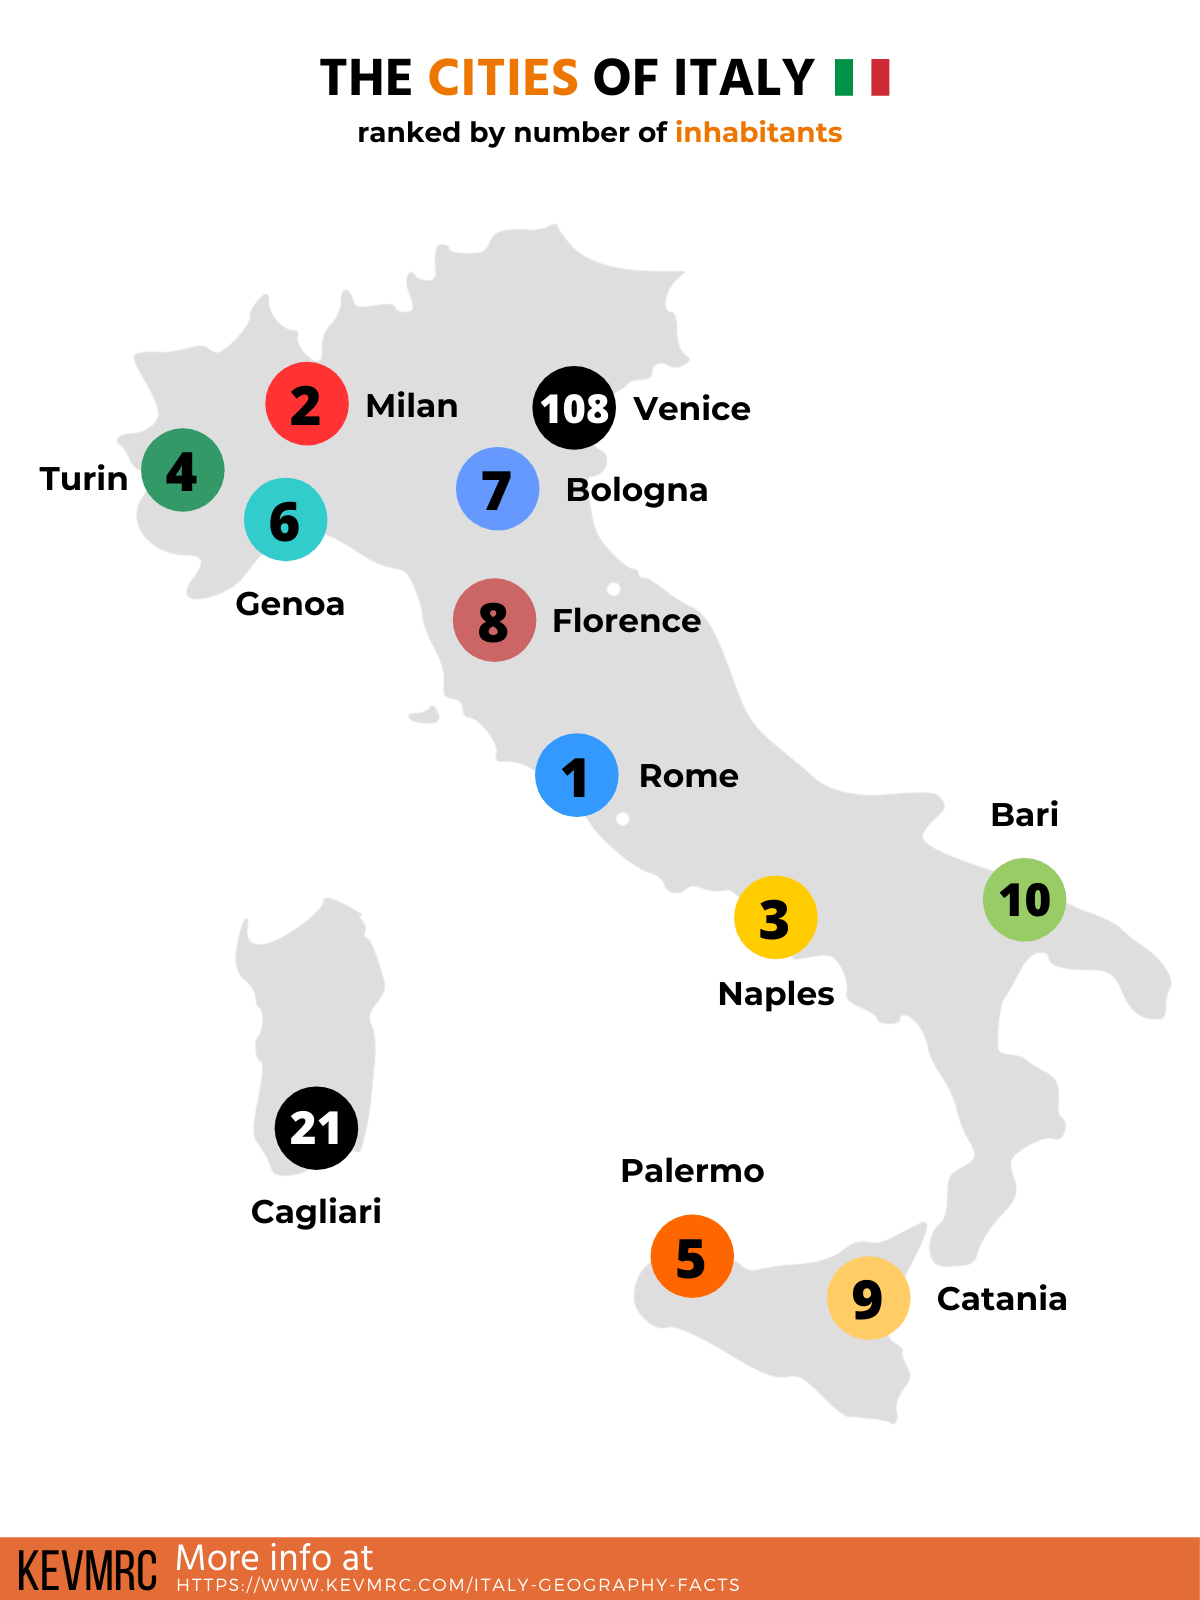 illustration about the cities of italy